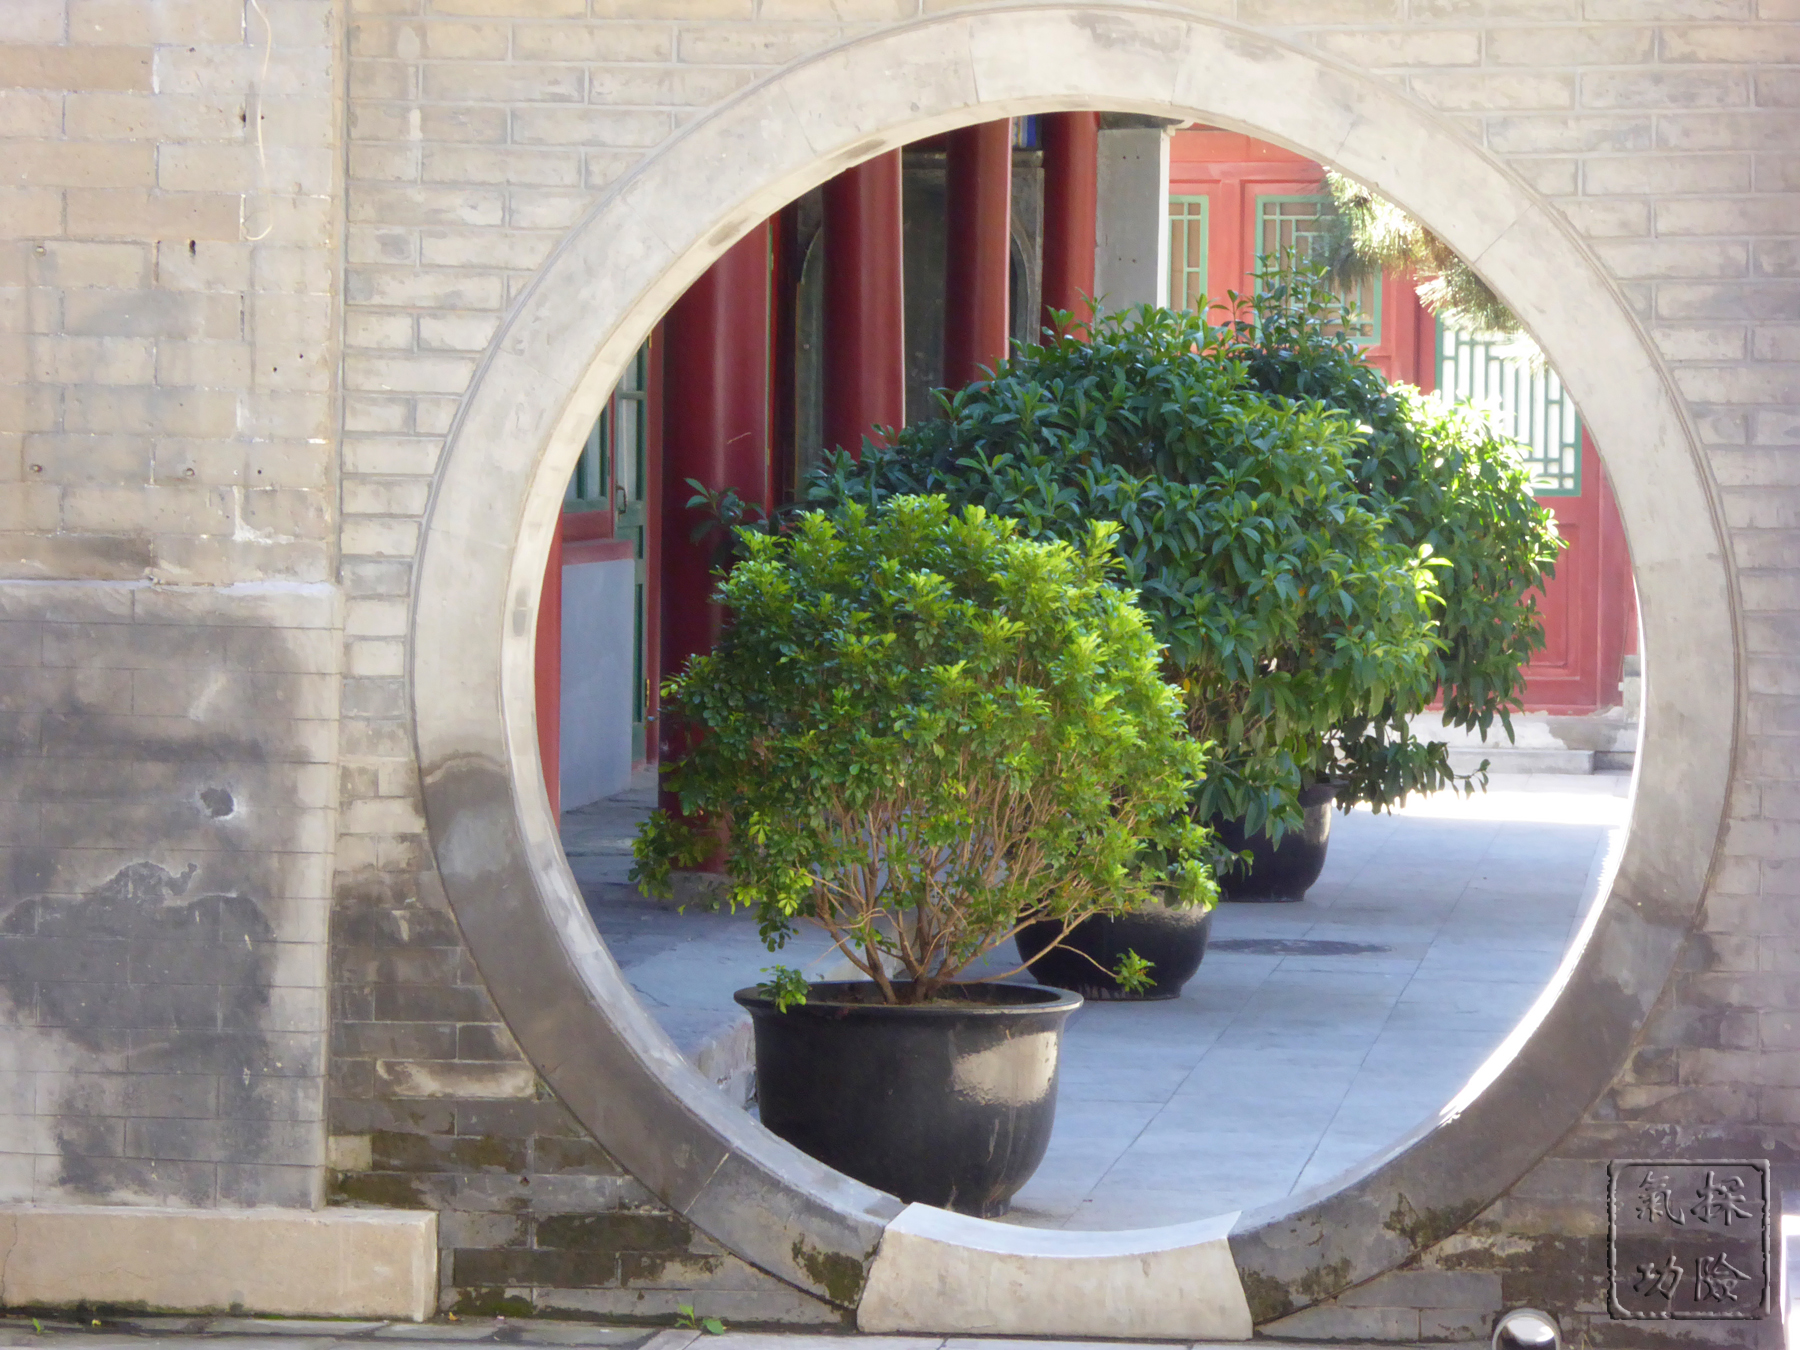 A round entrance in a wall at Beijing's White Cloud Temple reveals another area of the temple decorated with a row of green plants.